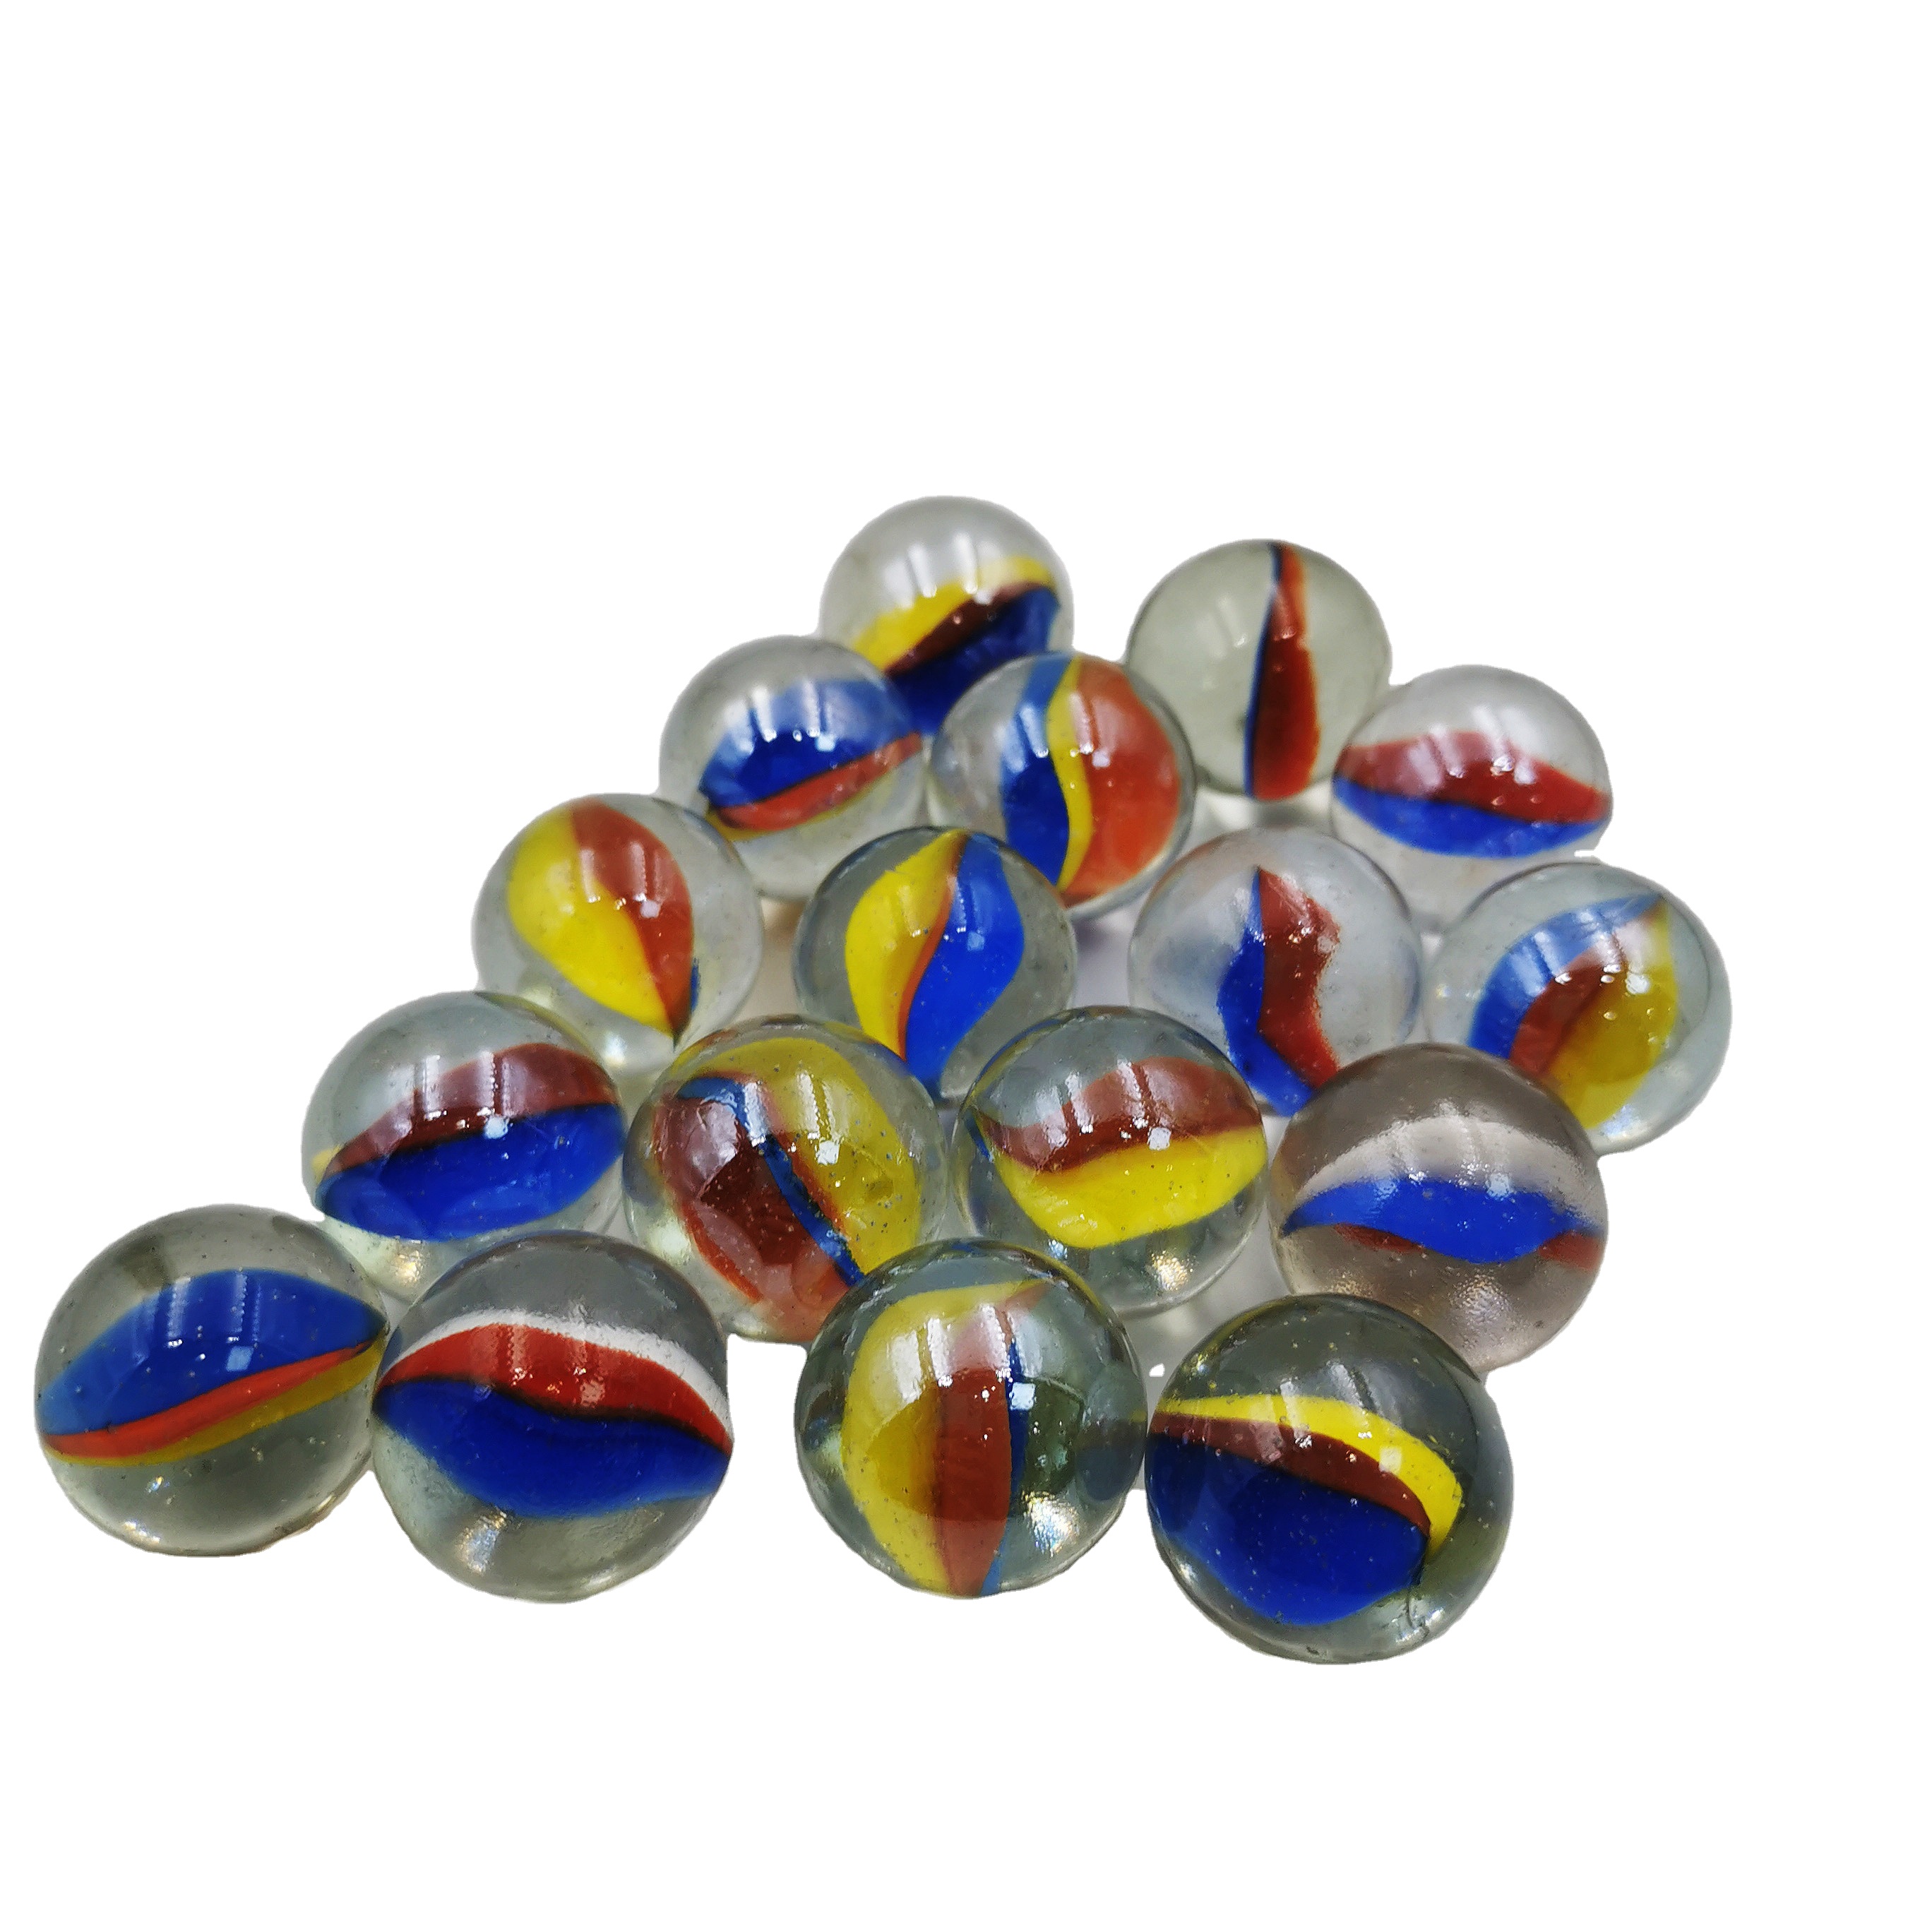 Blue color 14mm 16mm 25mm 35mm glass ball for Children's toy marbles